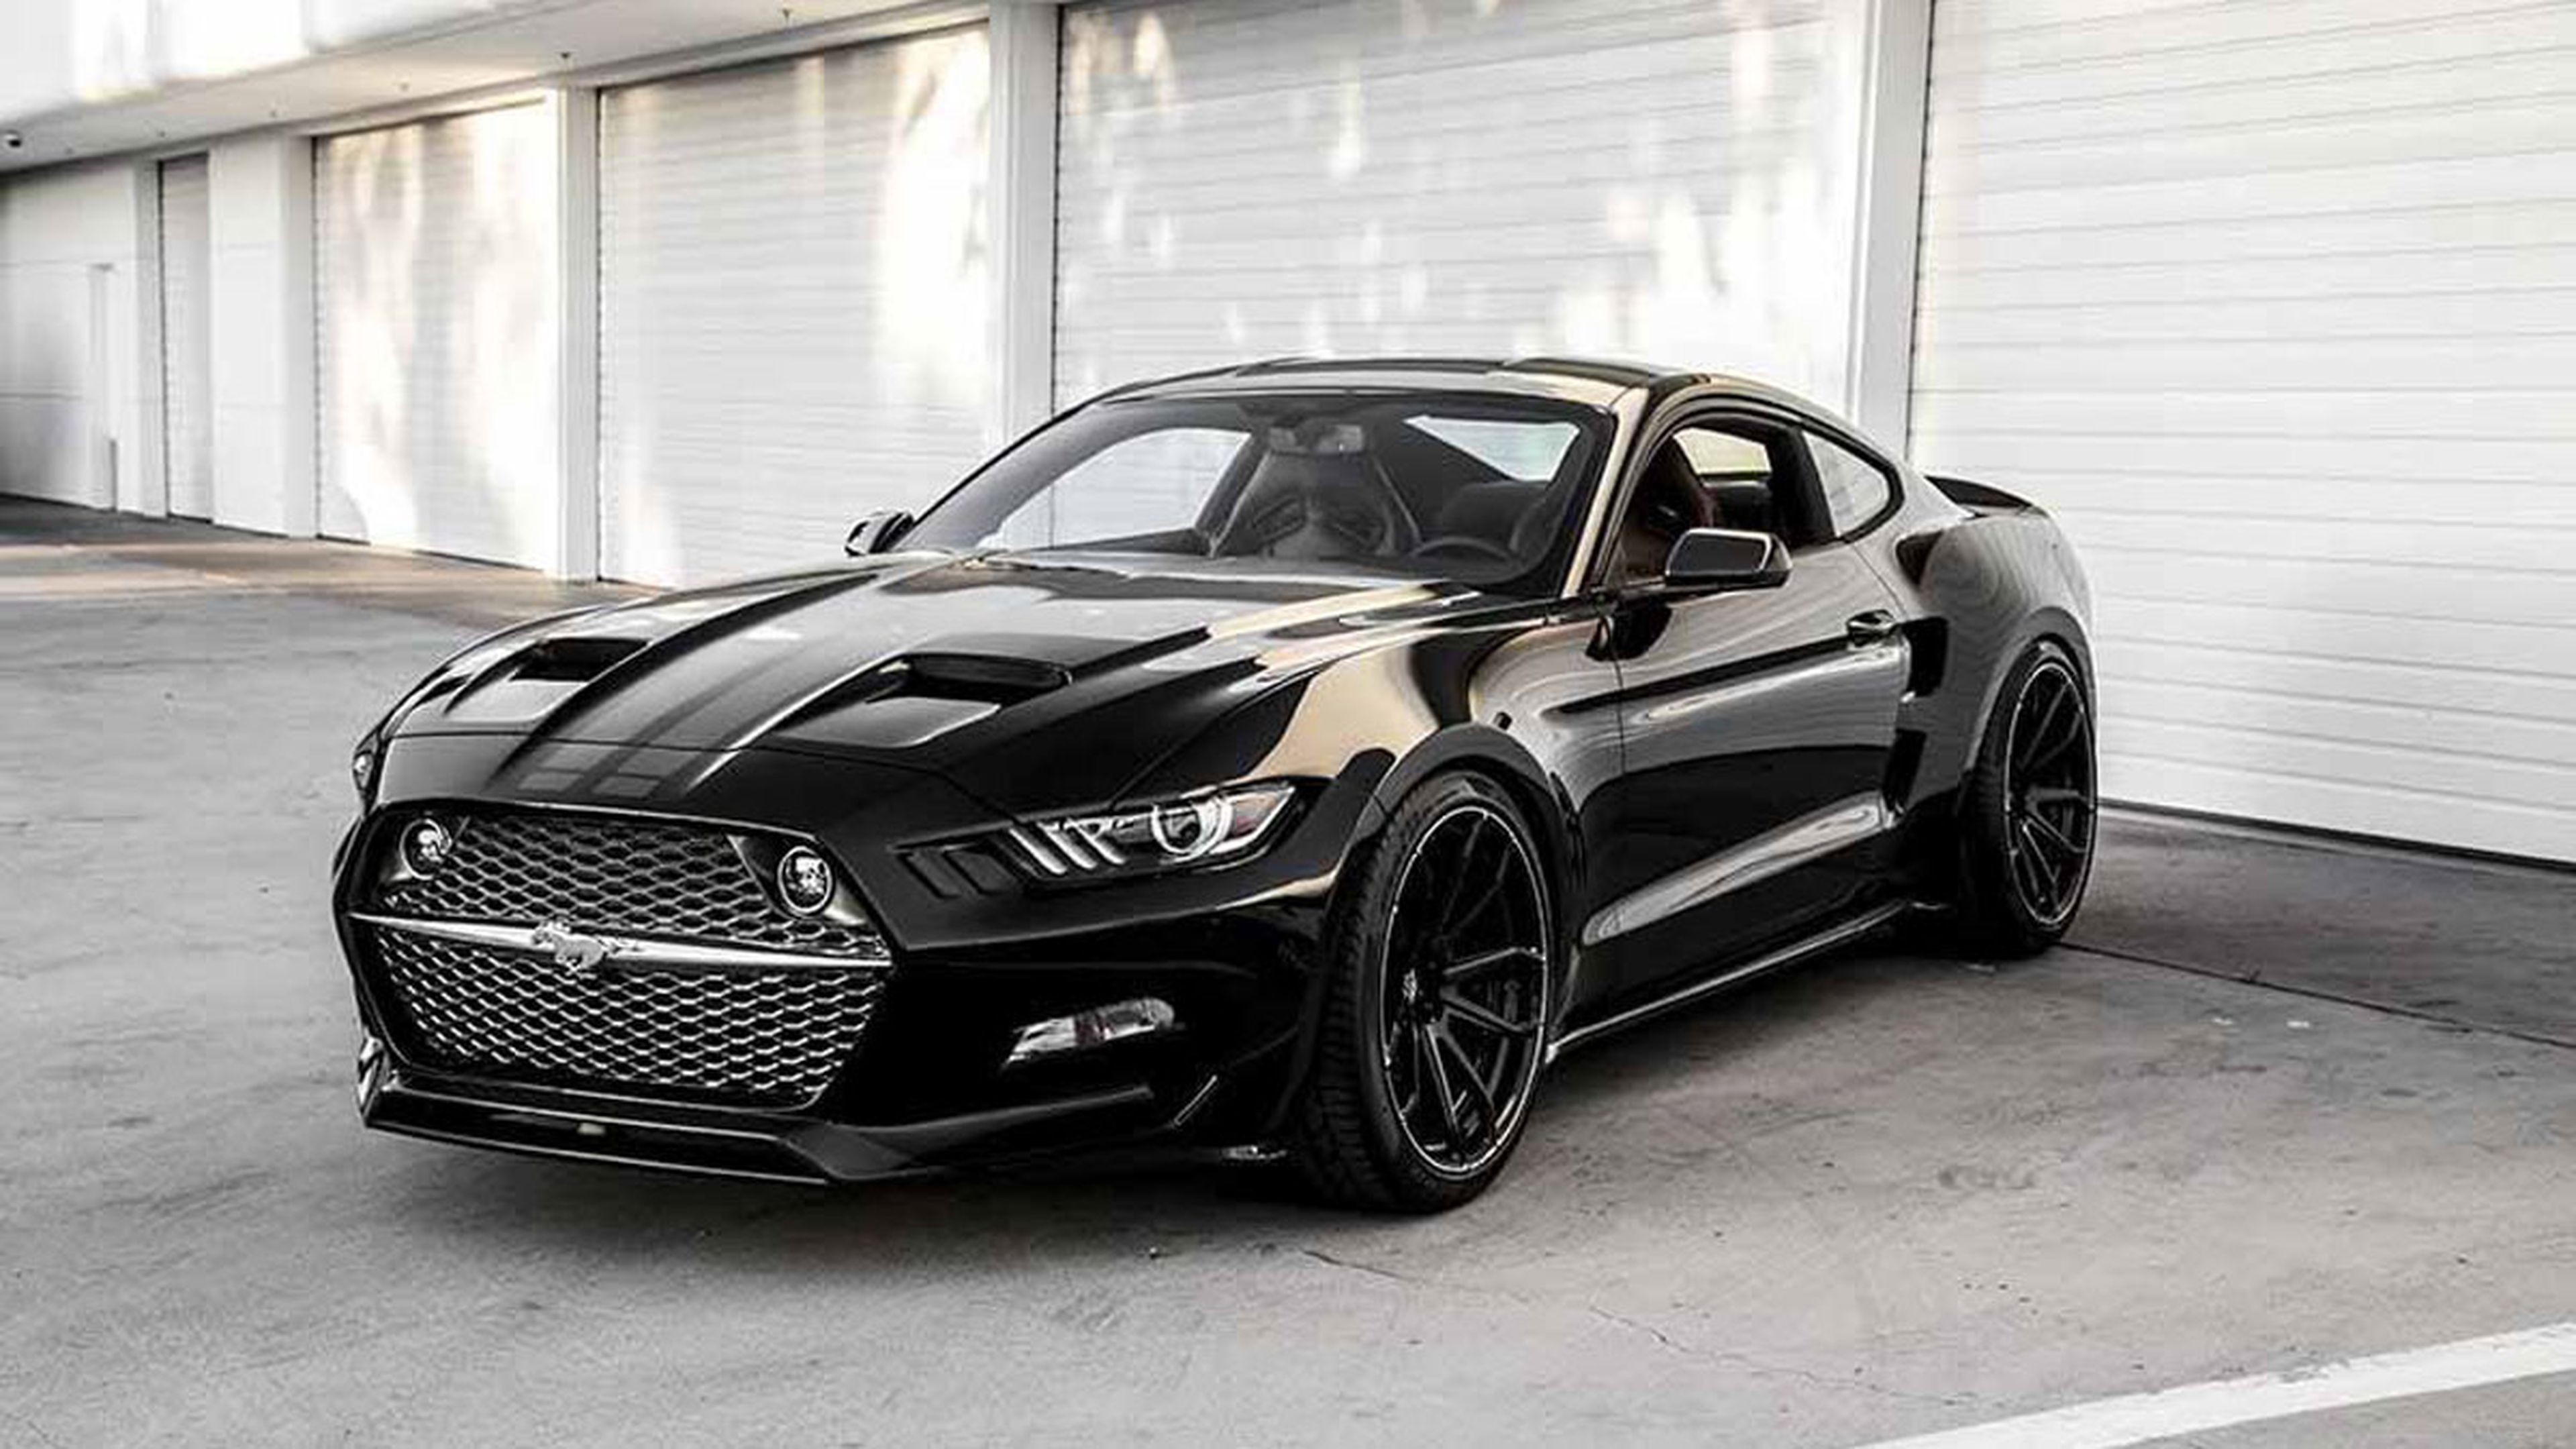 Ford Mustang GAS Rocket